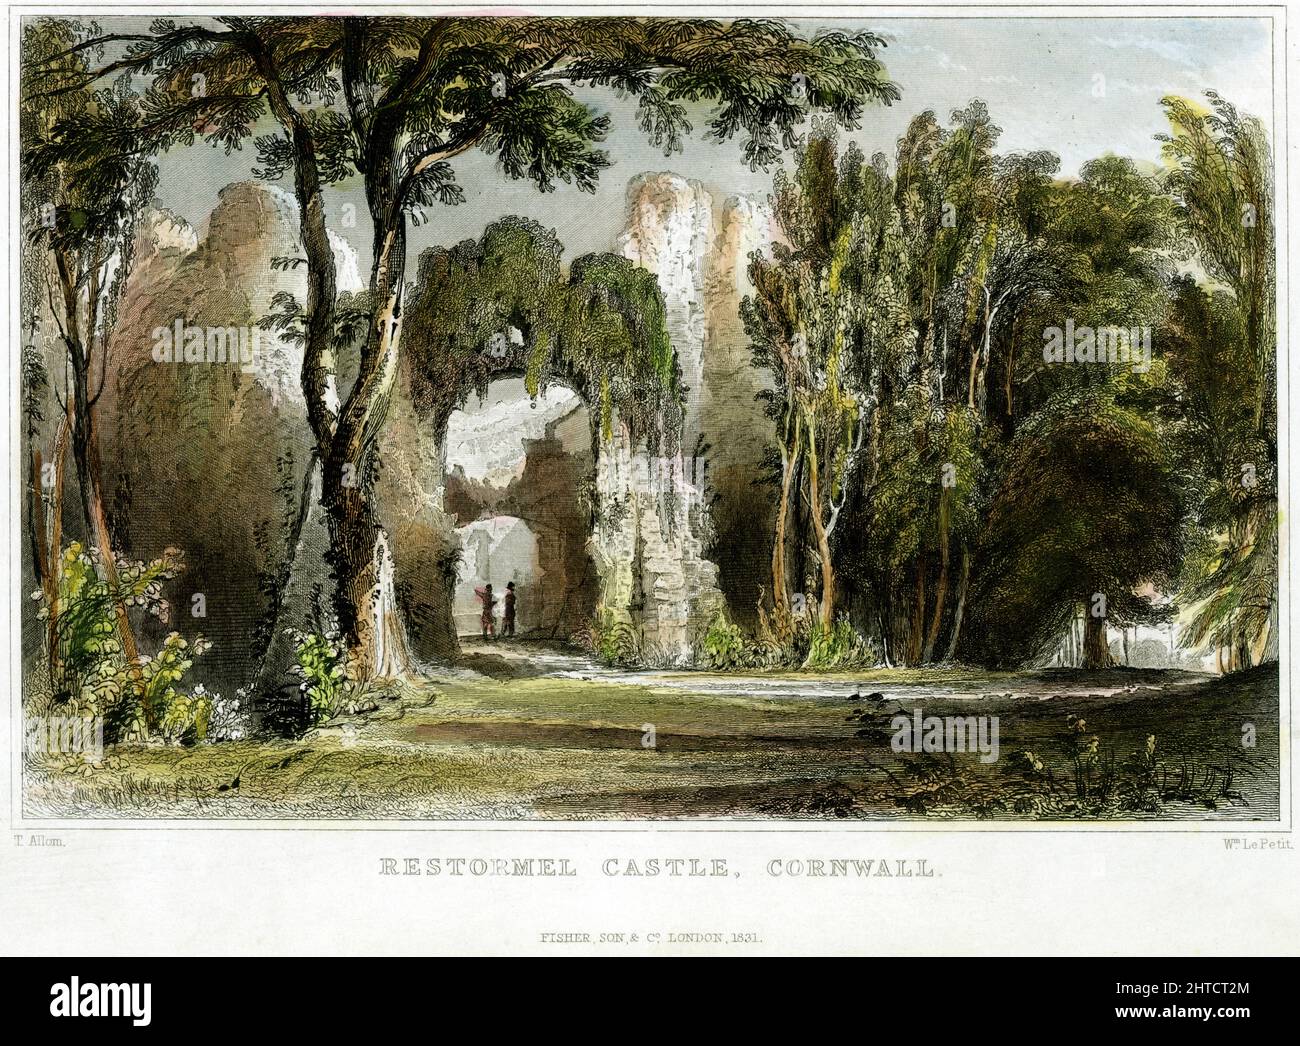 Restormel Castle, Restormel, Lostwithiel, Cornwall, c1830. Hand coloured engraving showing the gatehouse of the inner ward at Restormel Castle with two figures. Published in 'Devonshire &amp; Cornwall Illustrated', Fisher, Son &amp; Company, London, 1830-1832. Stock Photo